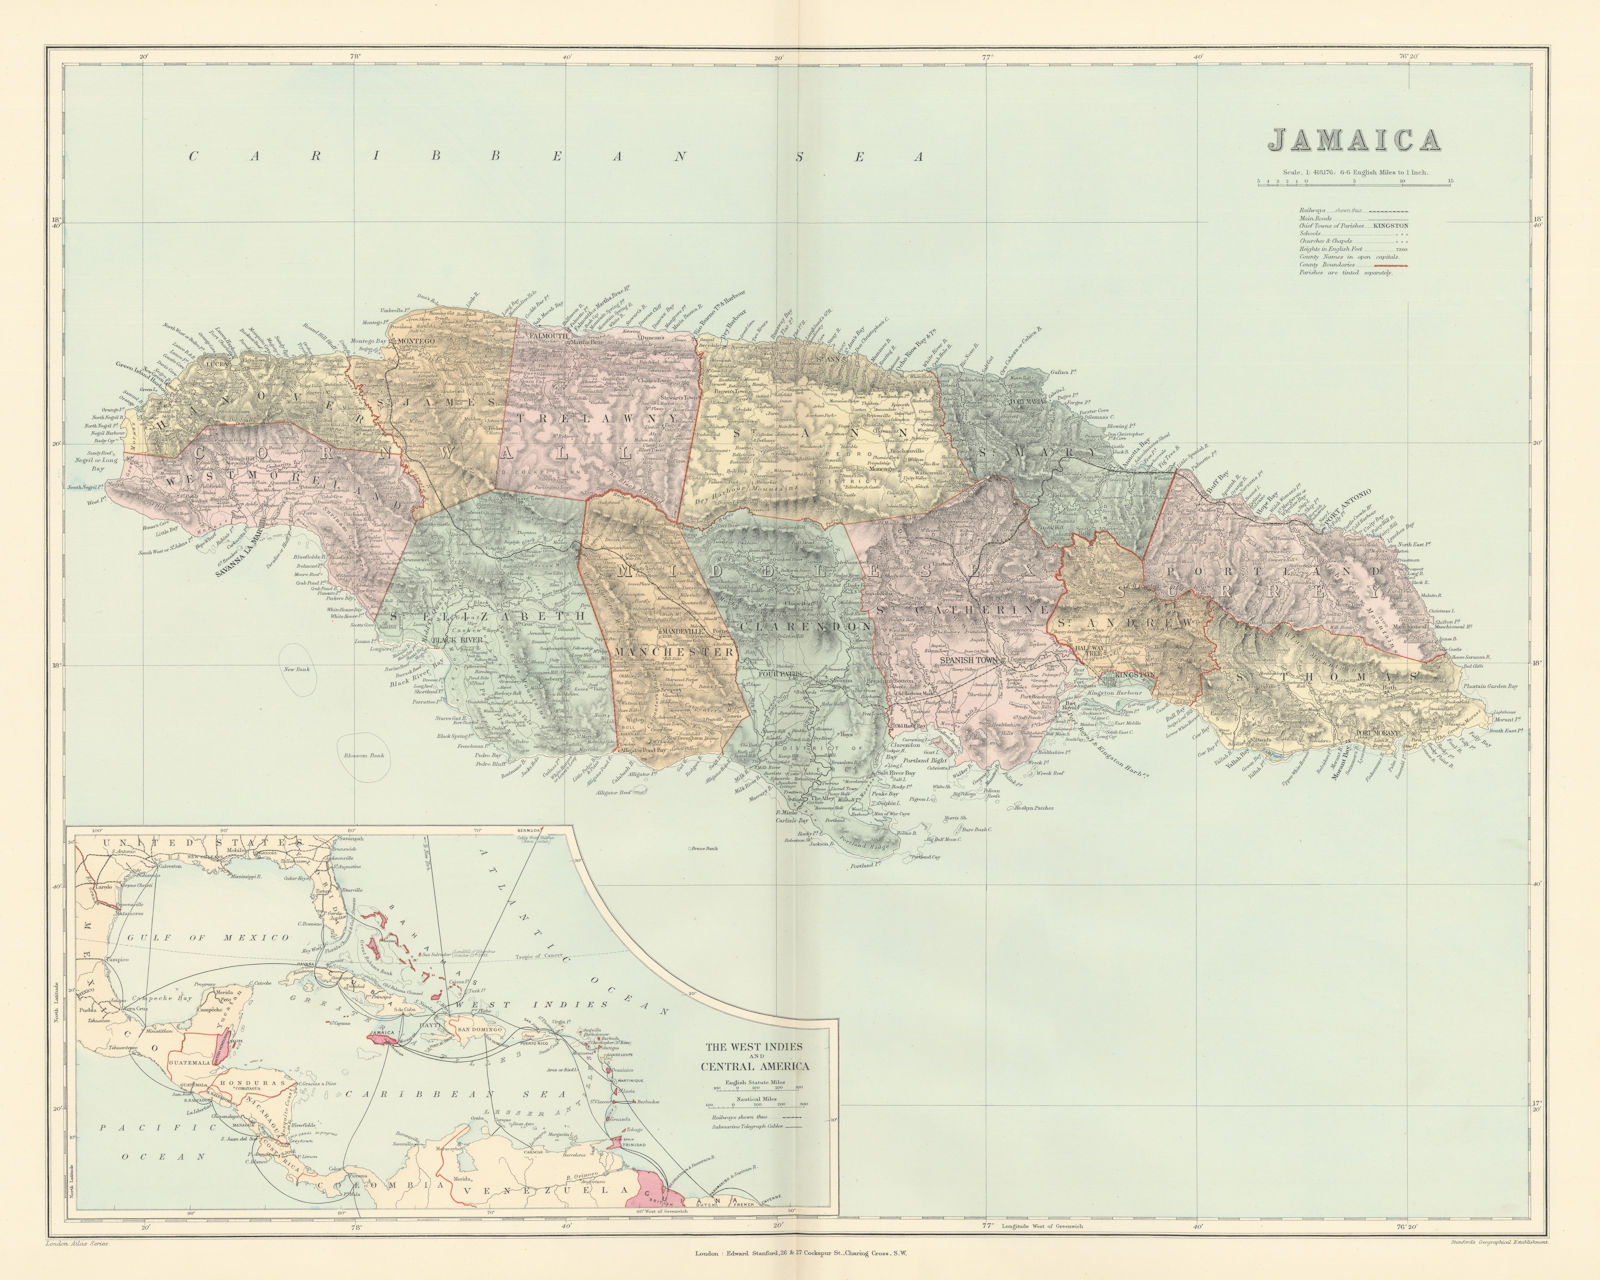 Jamaica, in parishes. West Indies telegraph cables. 51x63cm. STANFORD 1896 map